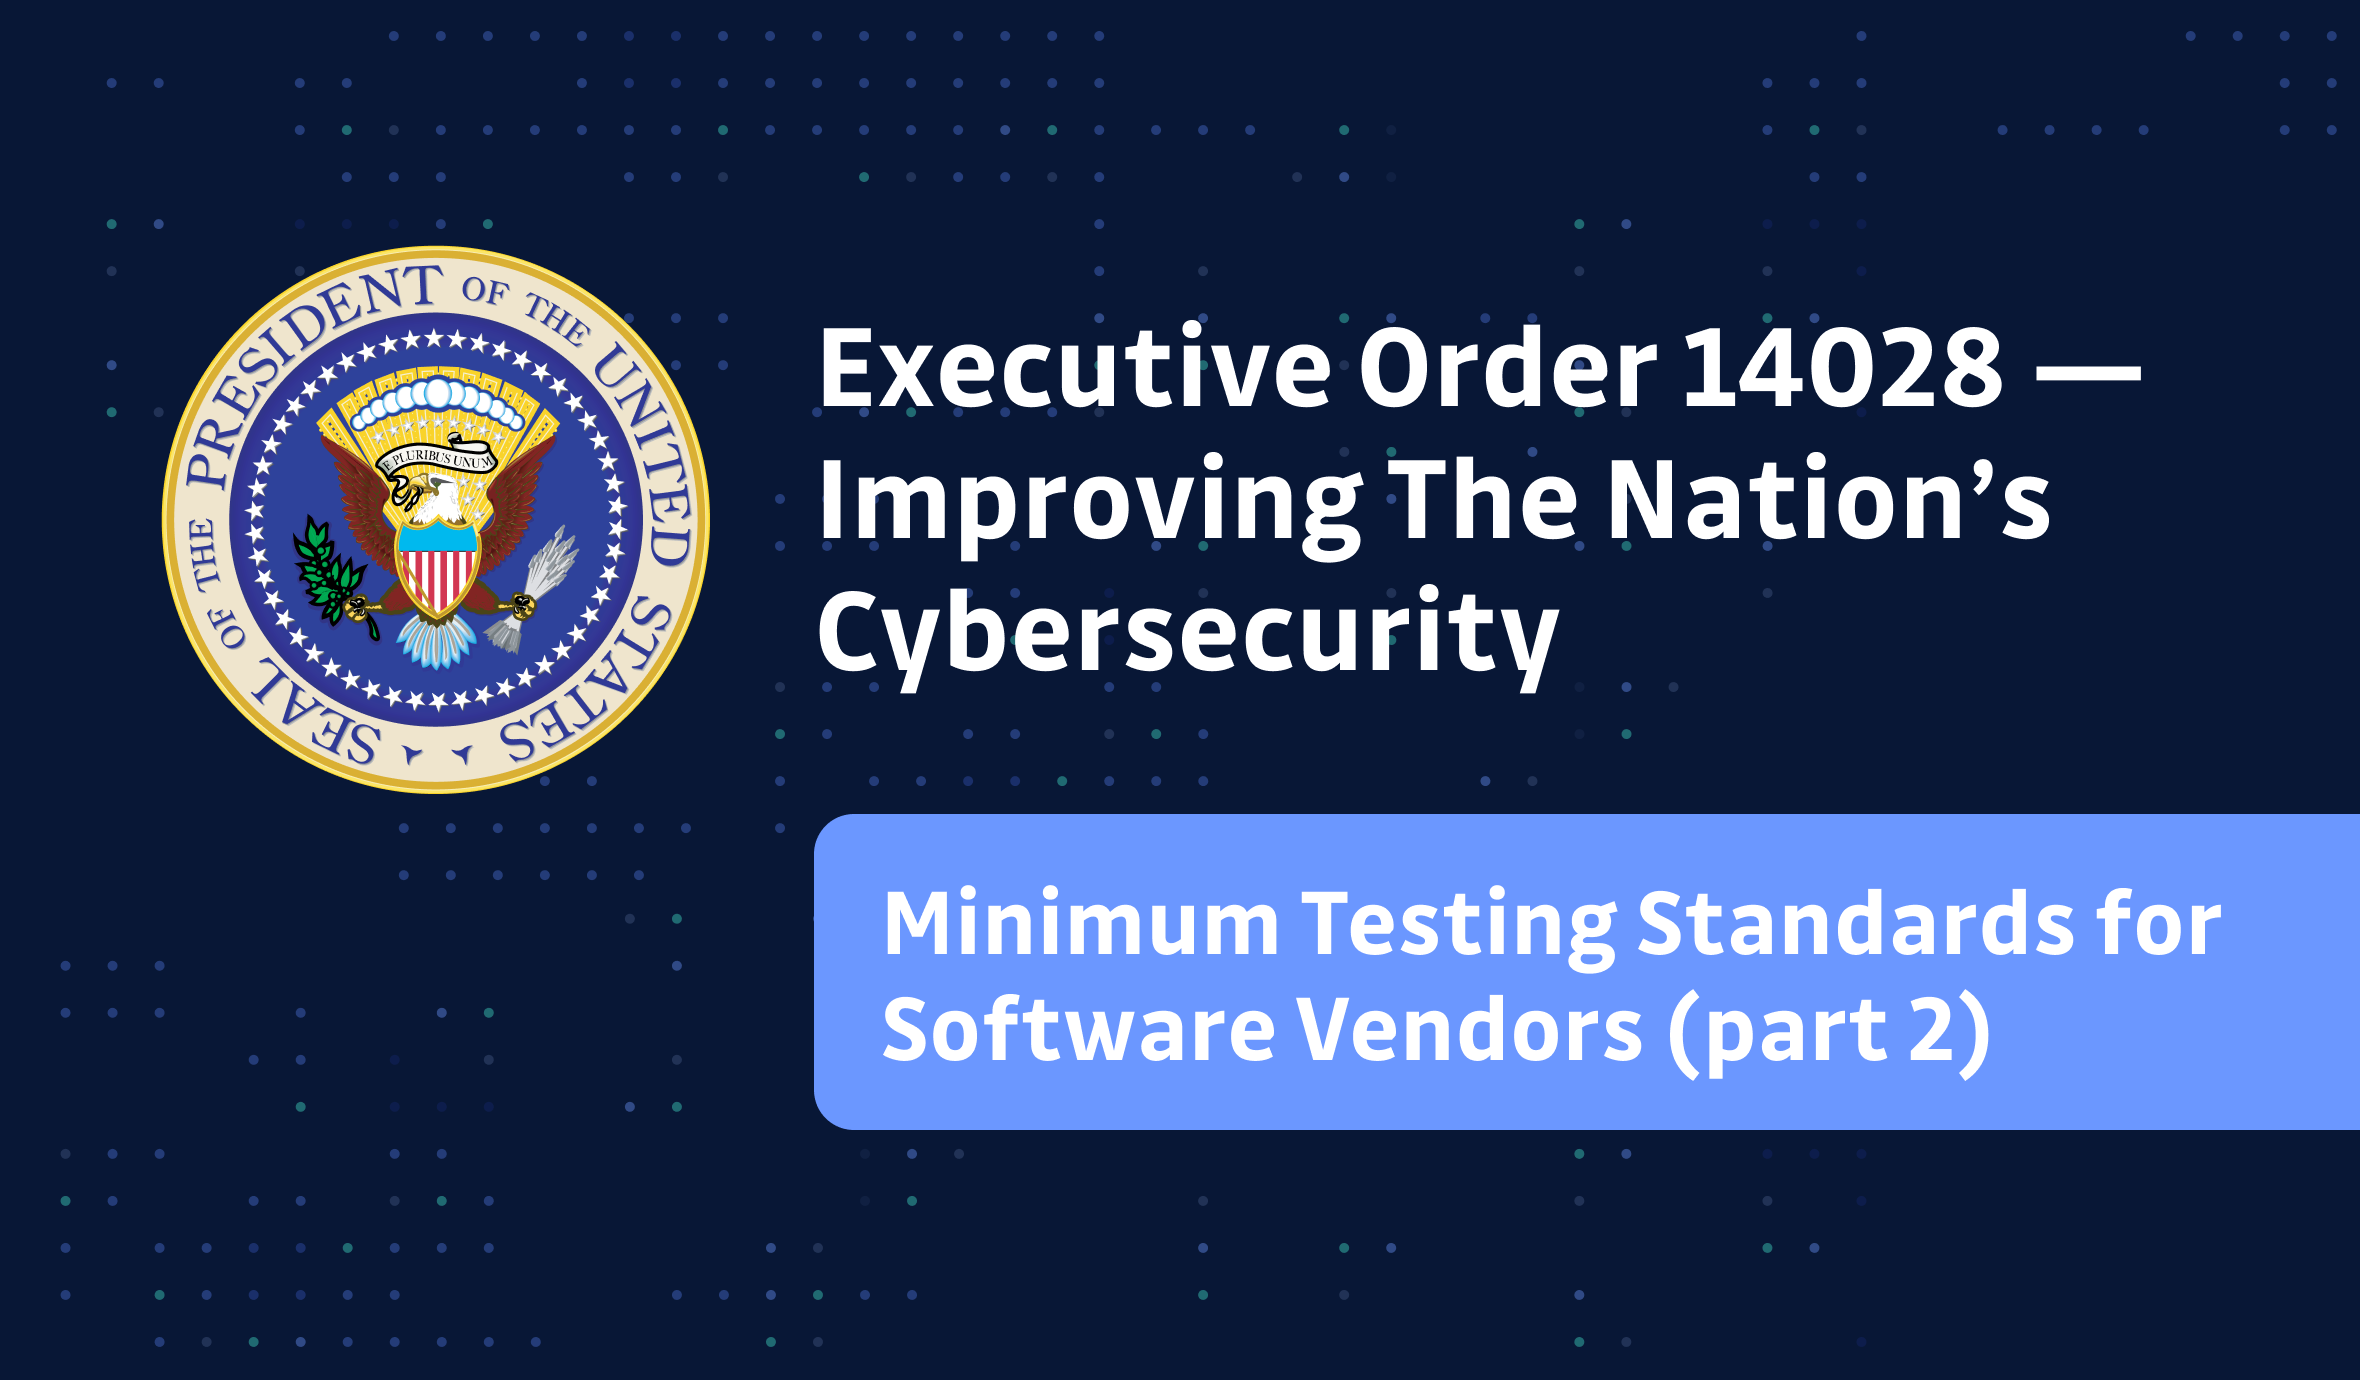 Improving the Nation's Cybersecurity — Minimum Testing Standards for Software Vendors (part 2)